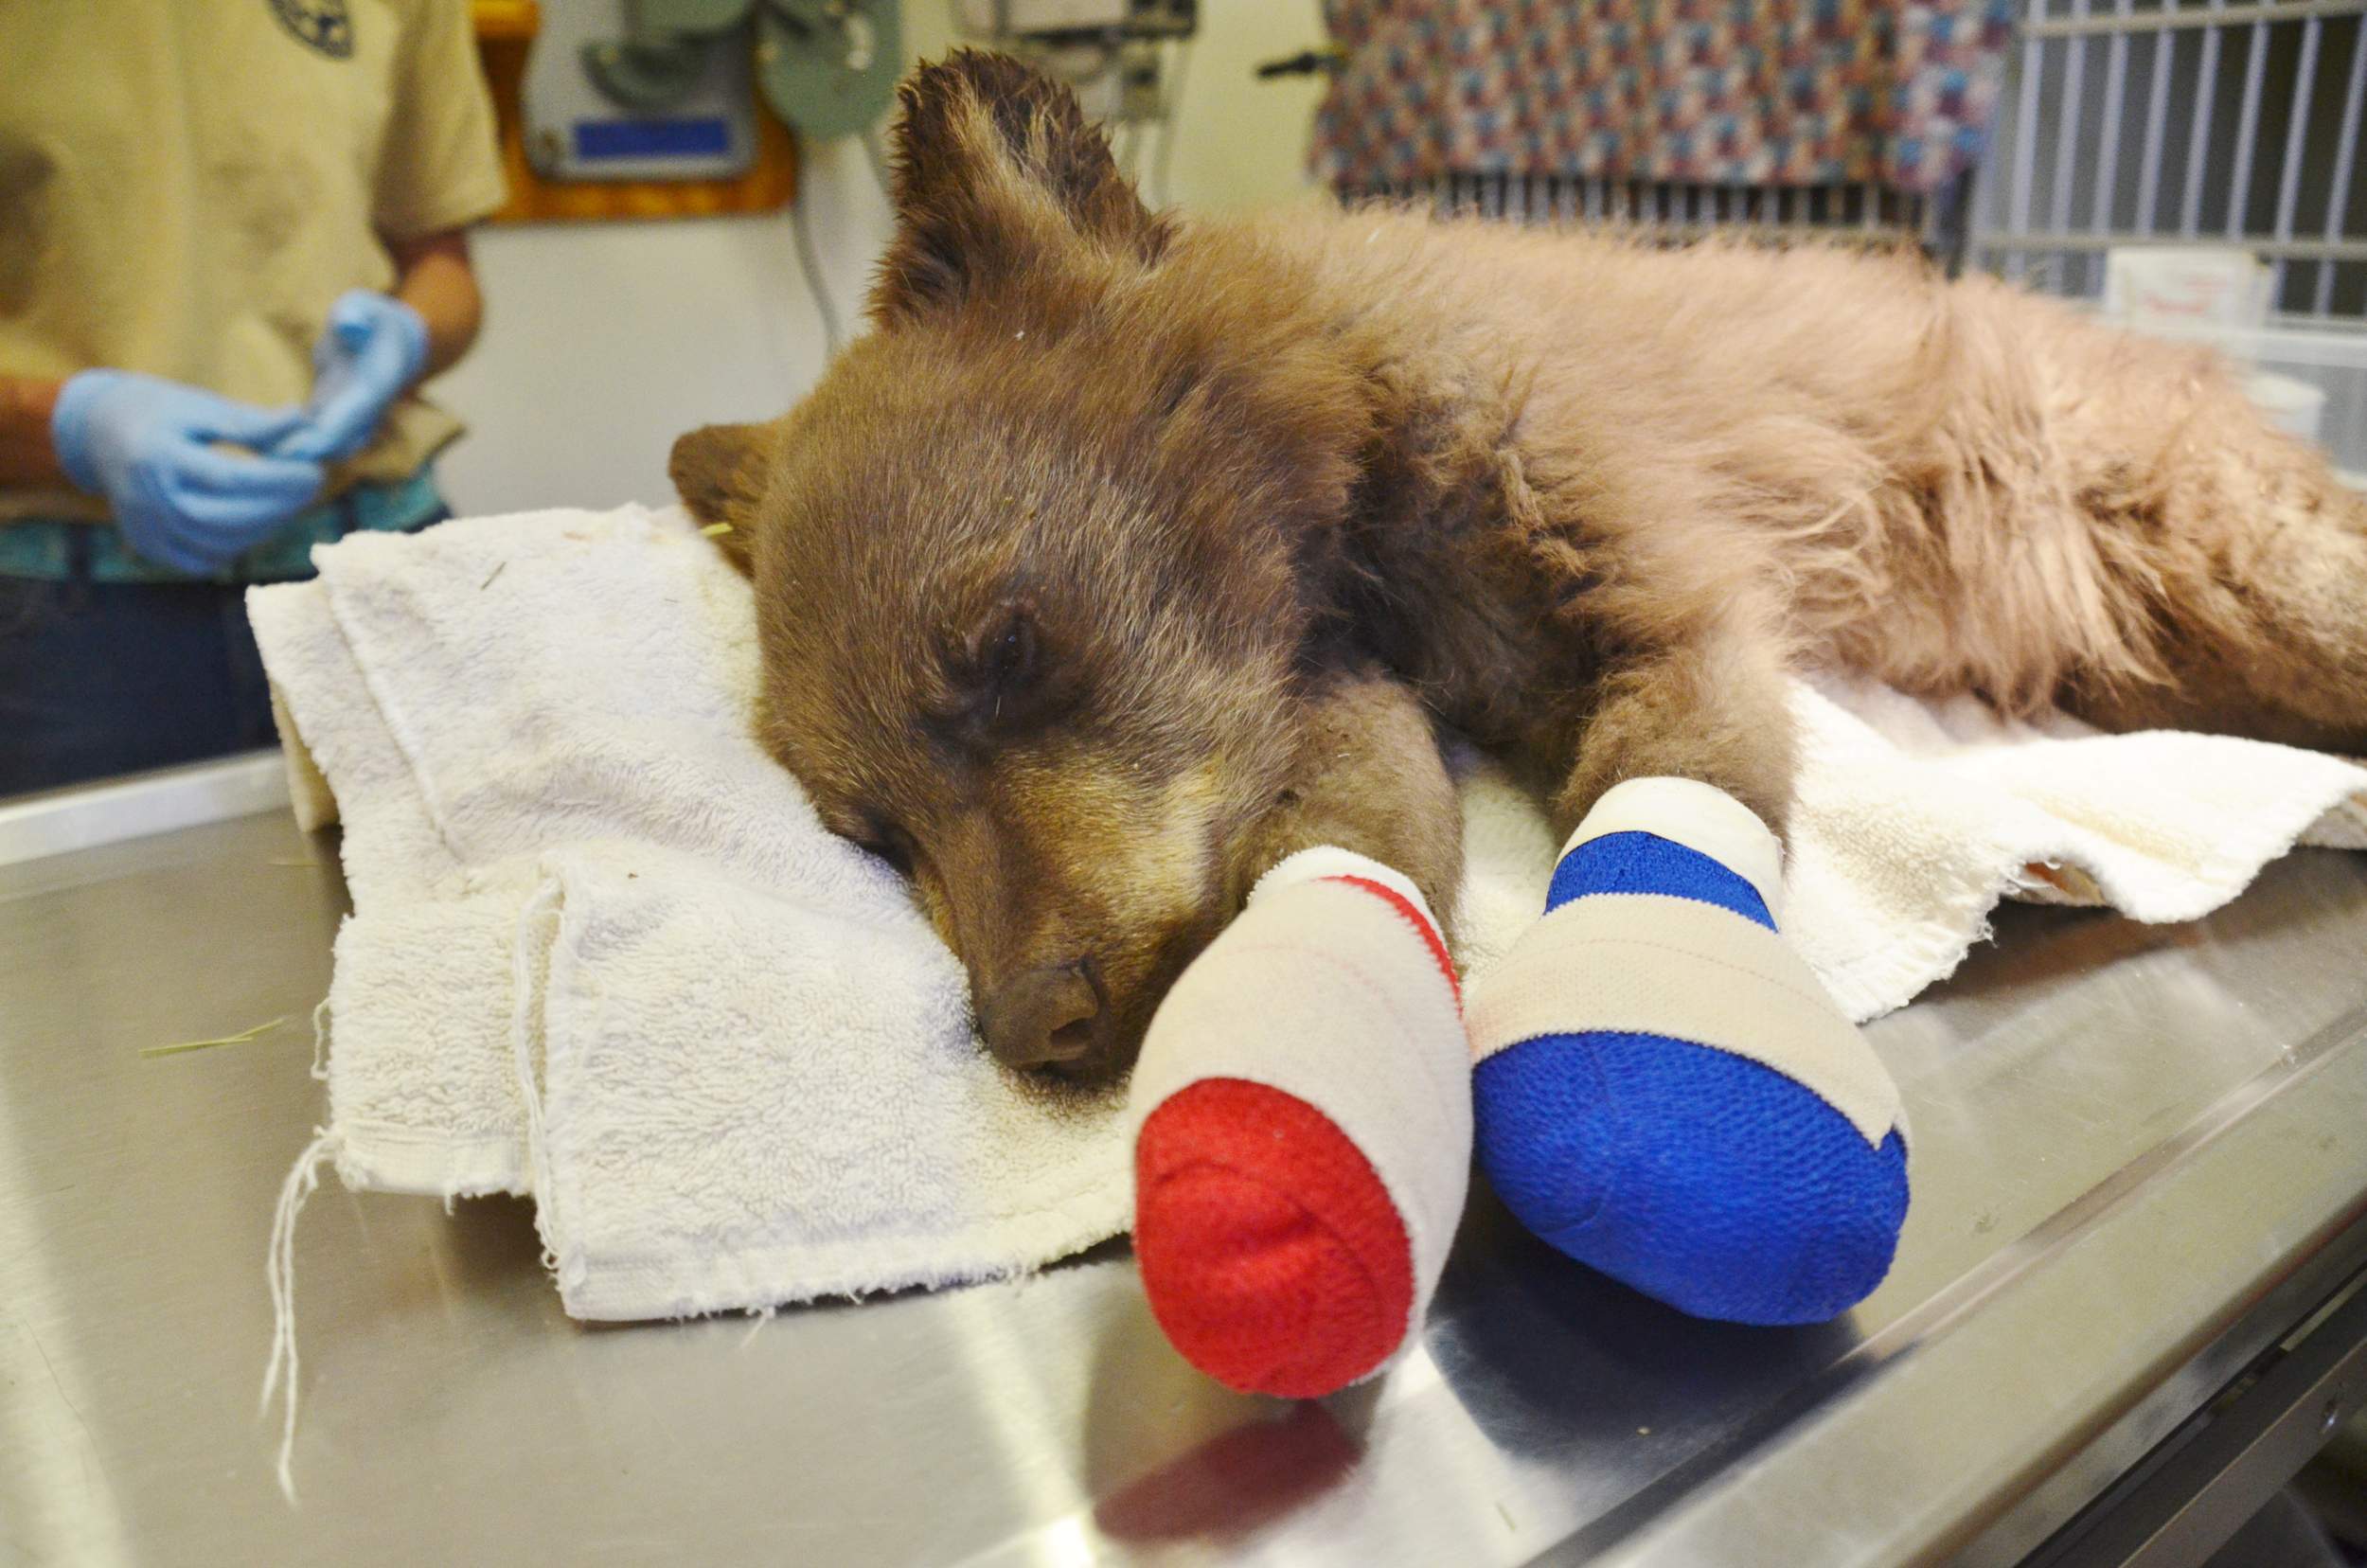 Dog Paws On Fire Logo - Burned bear cub gains international attention, seen as symbol of hope